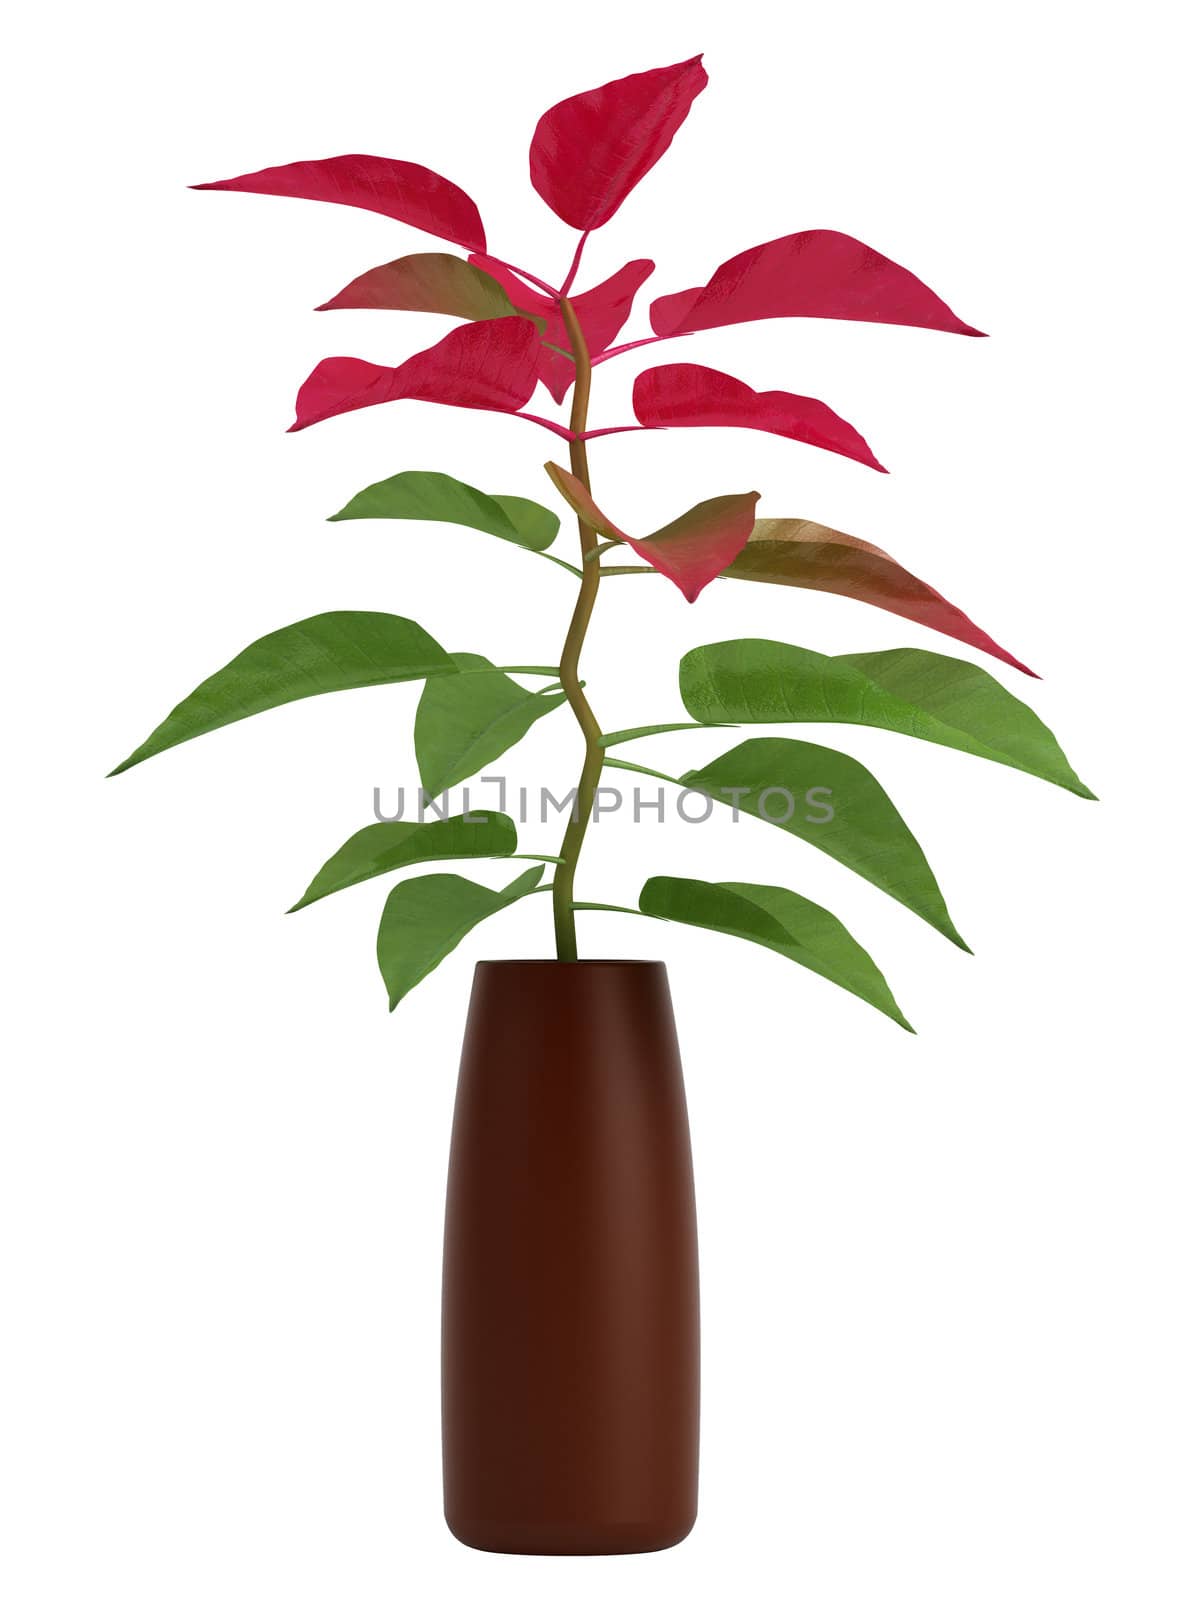 Home plant with green and red leaves isolated on white background